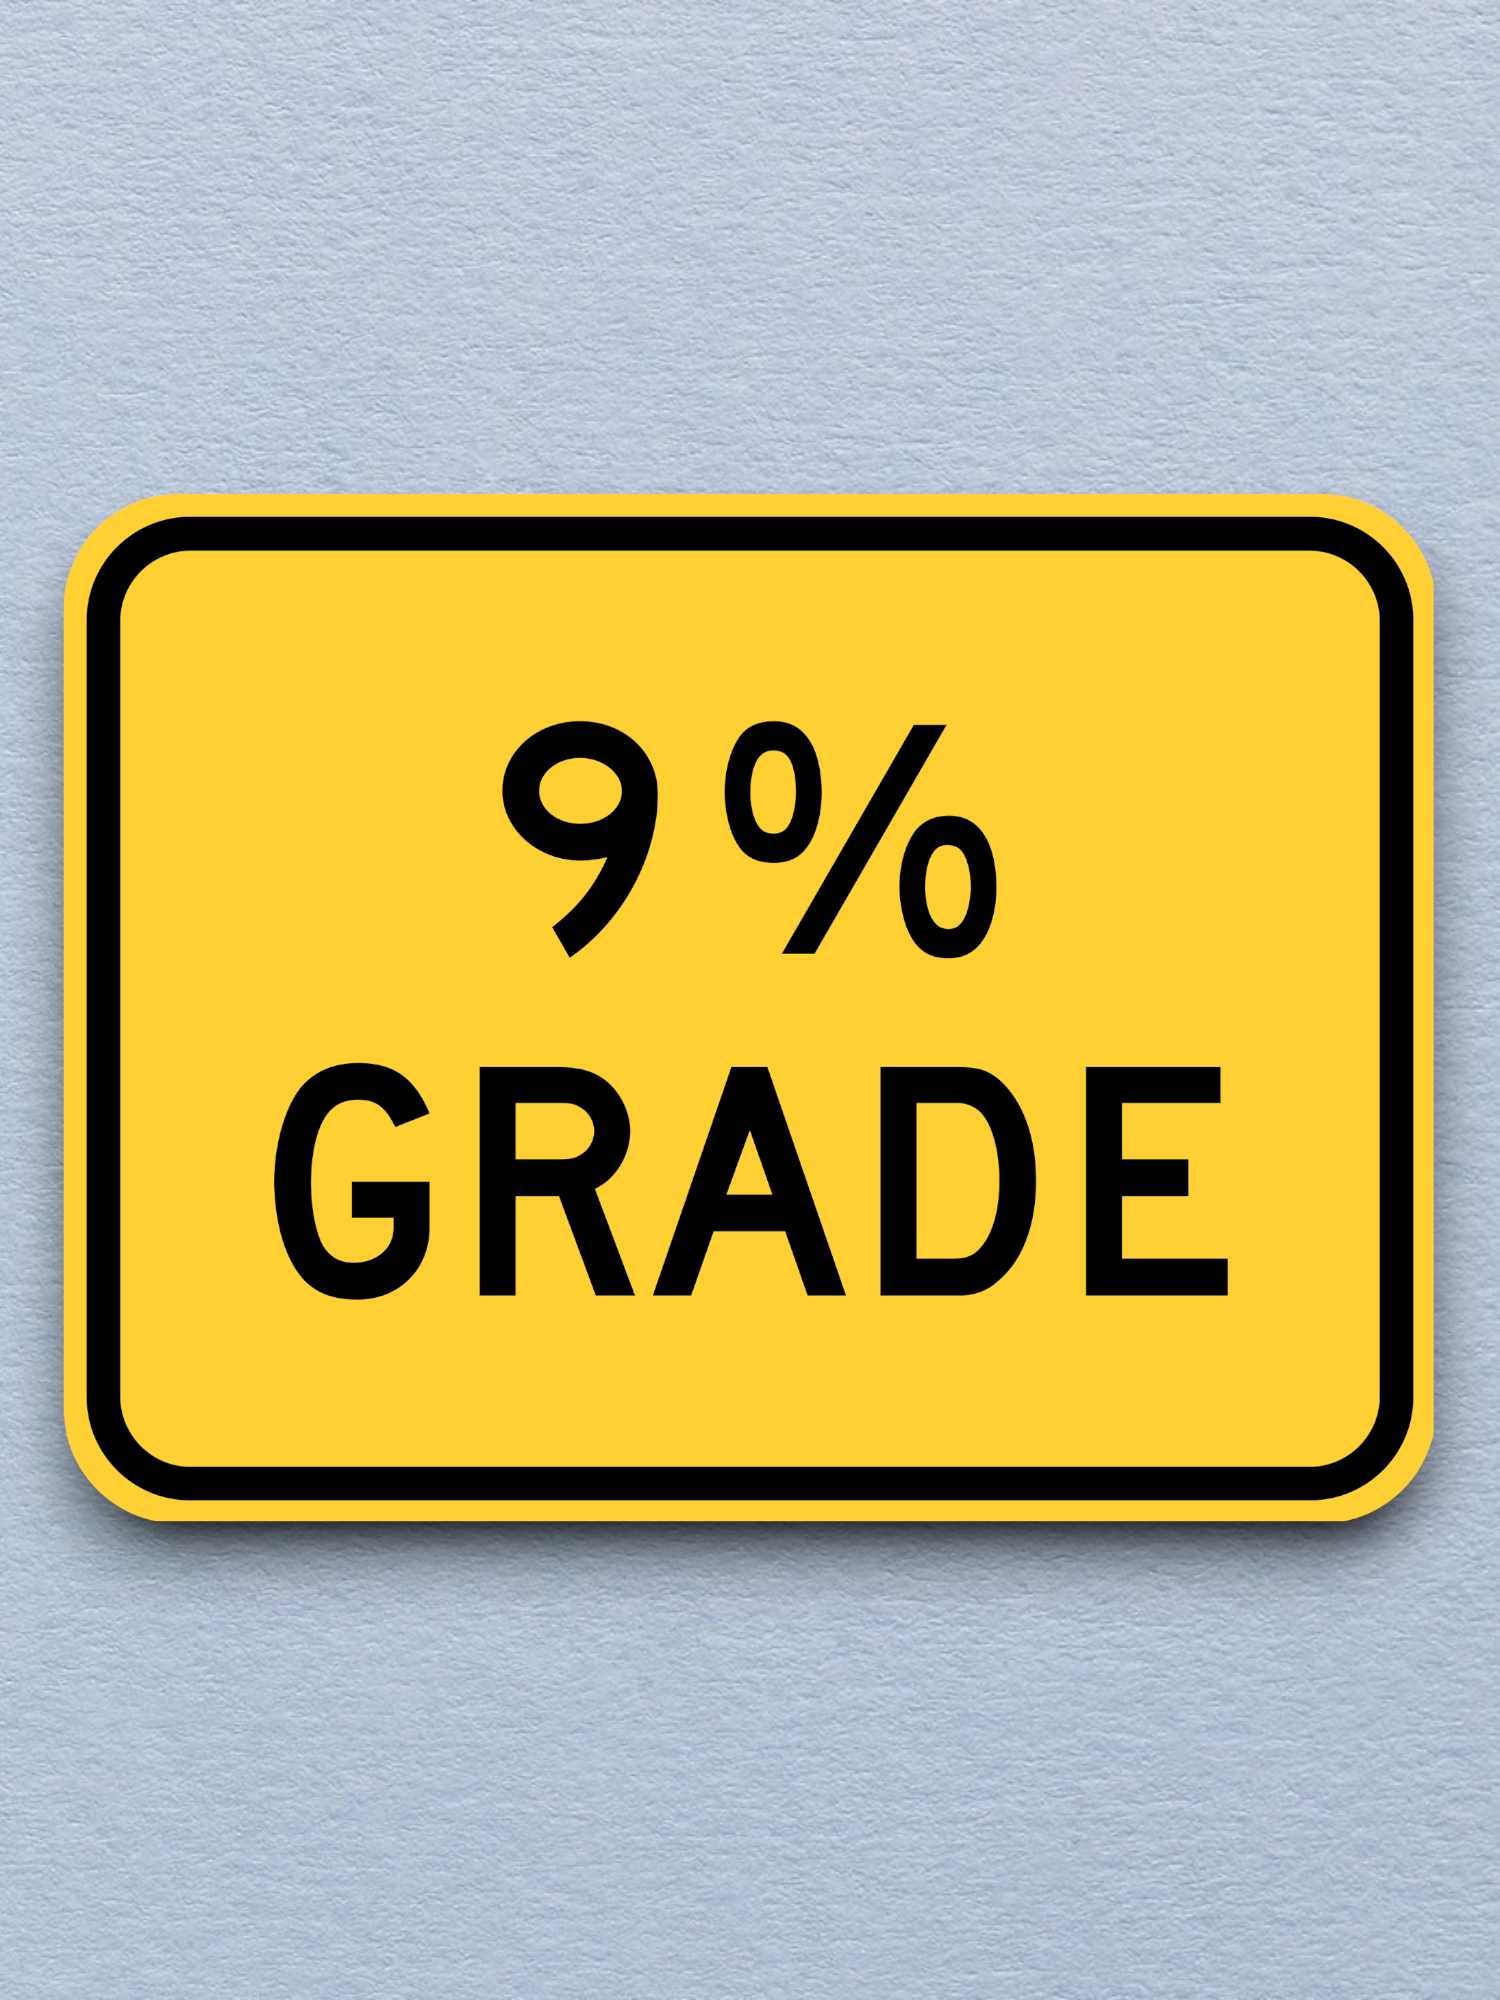 9% grade ahead United States Road Sign Sticker